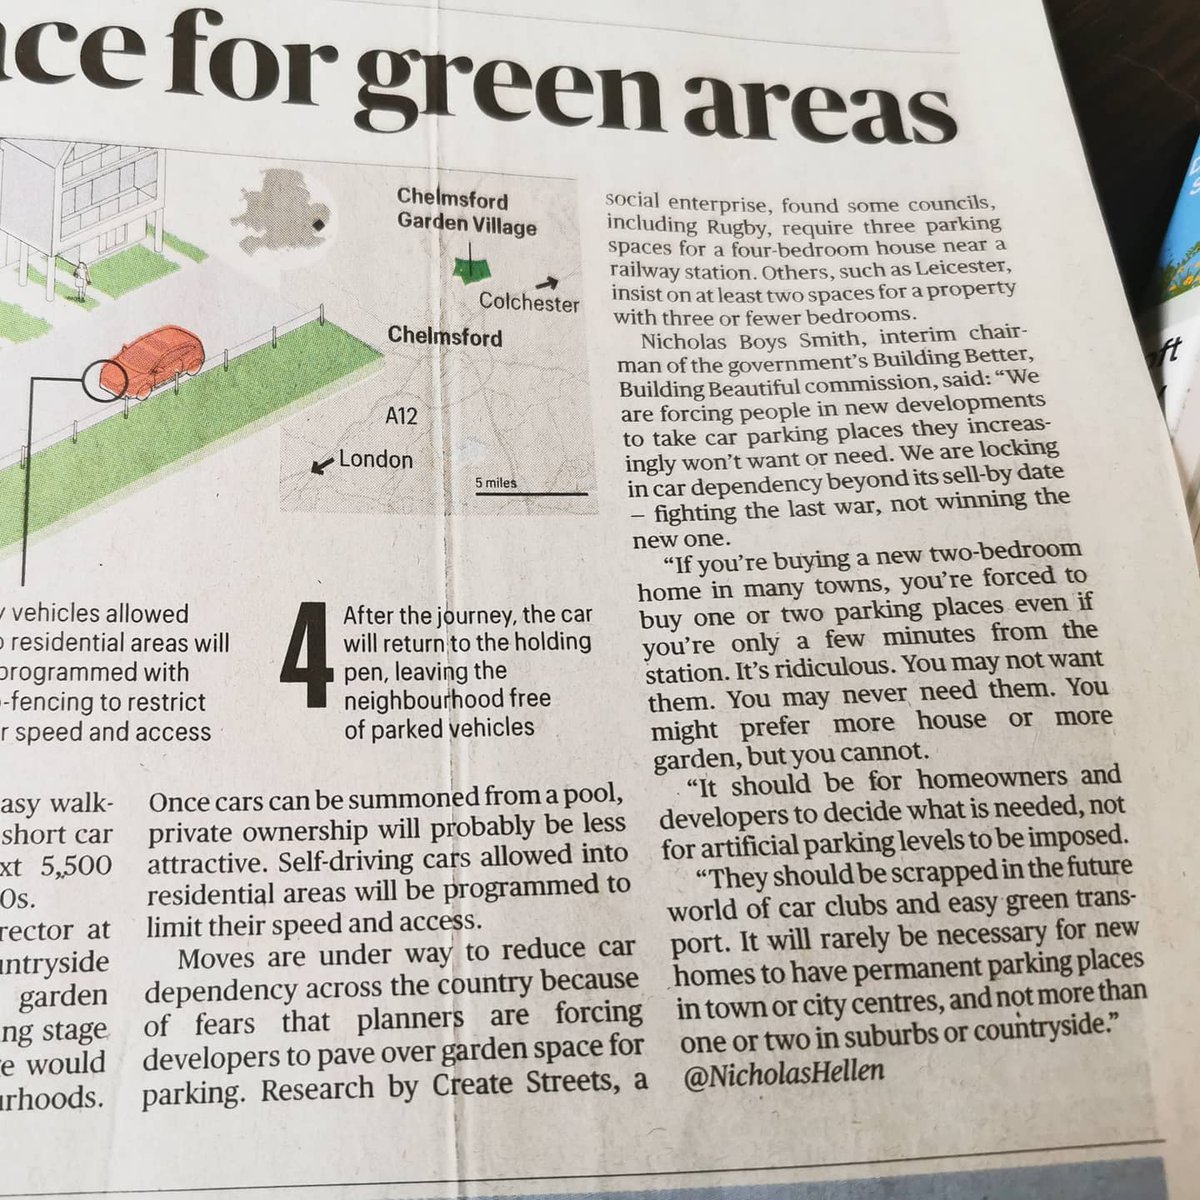 My report on why there is too much parking required for new housing mentioned in today's Sunday TimesToo many places enforce high levels of parking at the expense of more homes, gardens and parksLocal authorities should parking maximums not parking minimums